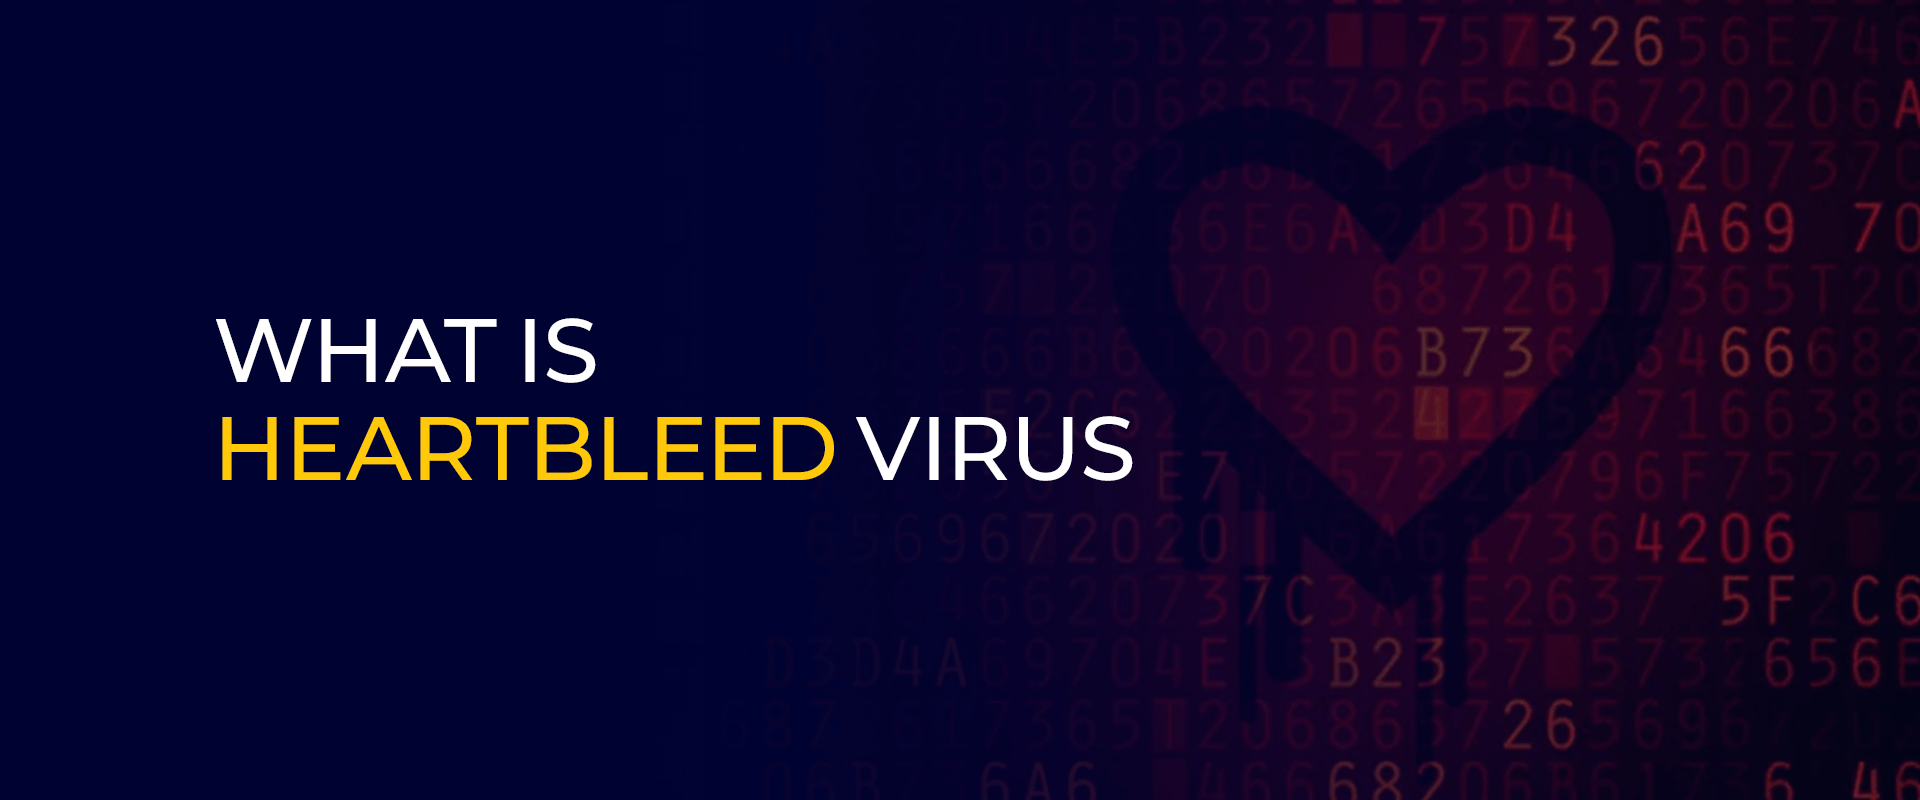 What is Heartbleed Virus